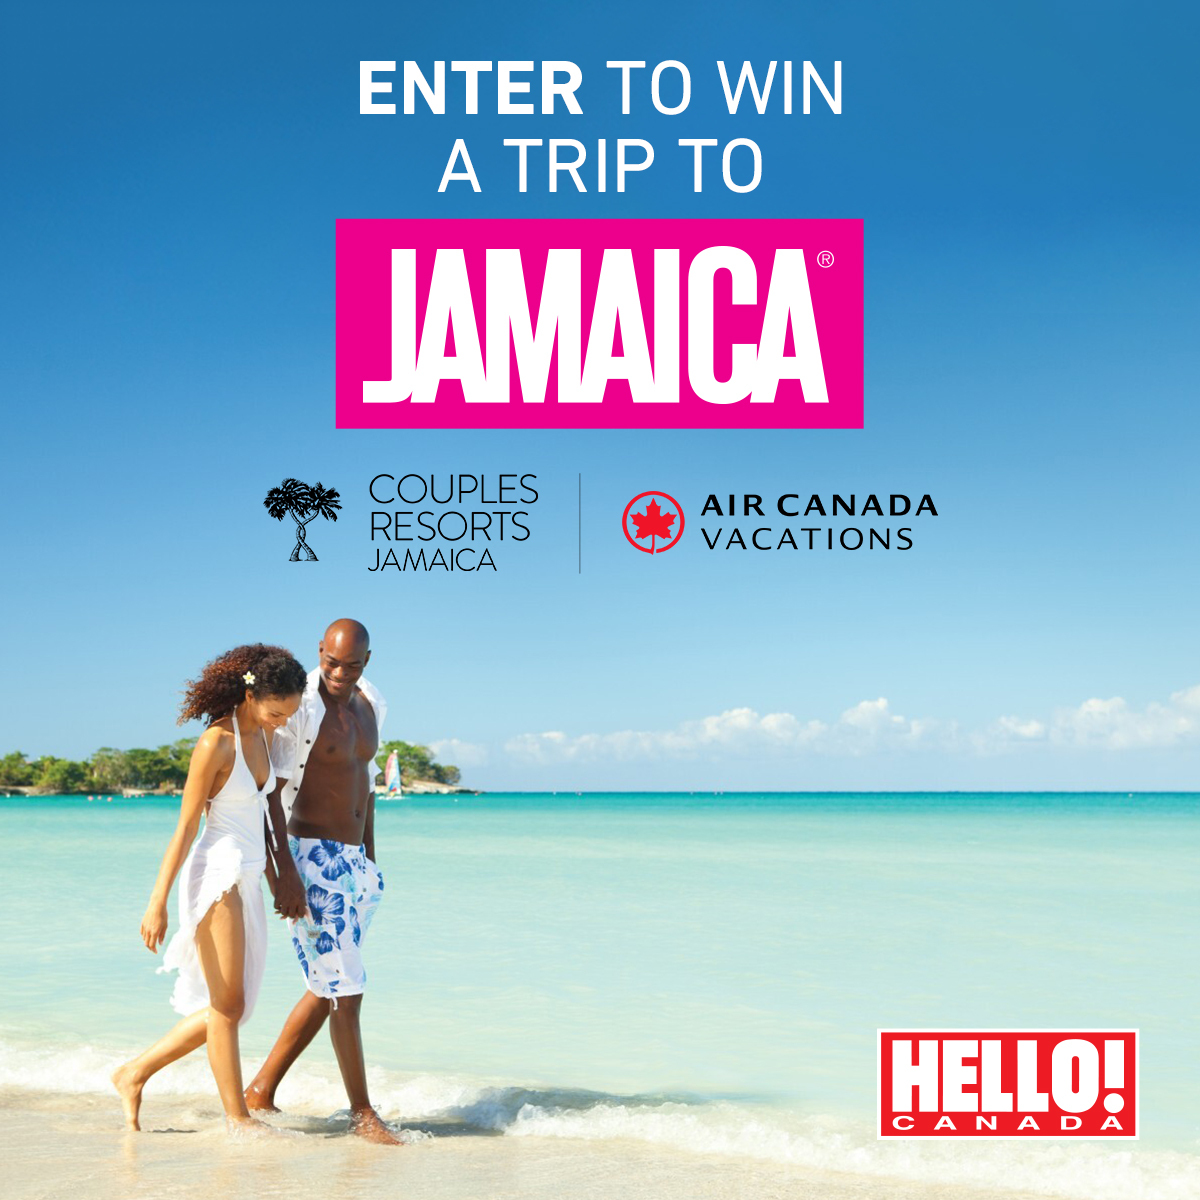 Enter to win a trip to JAMAICA